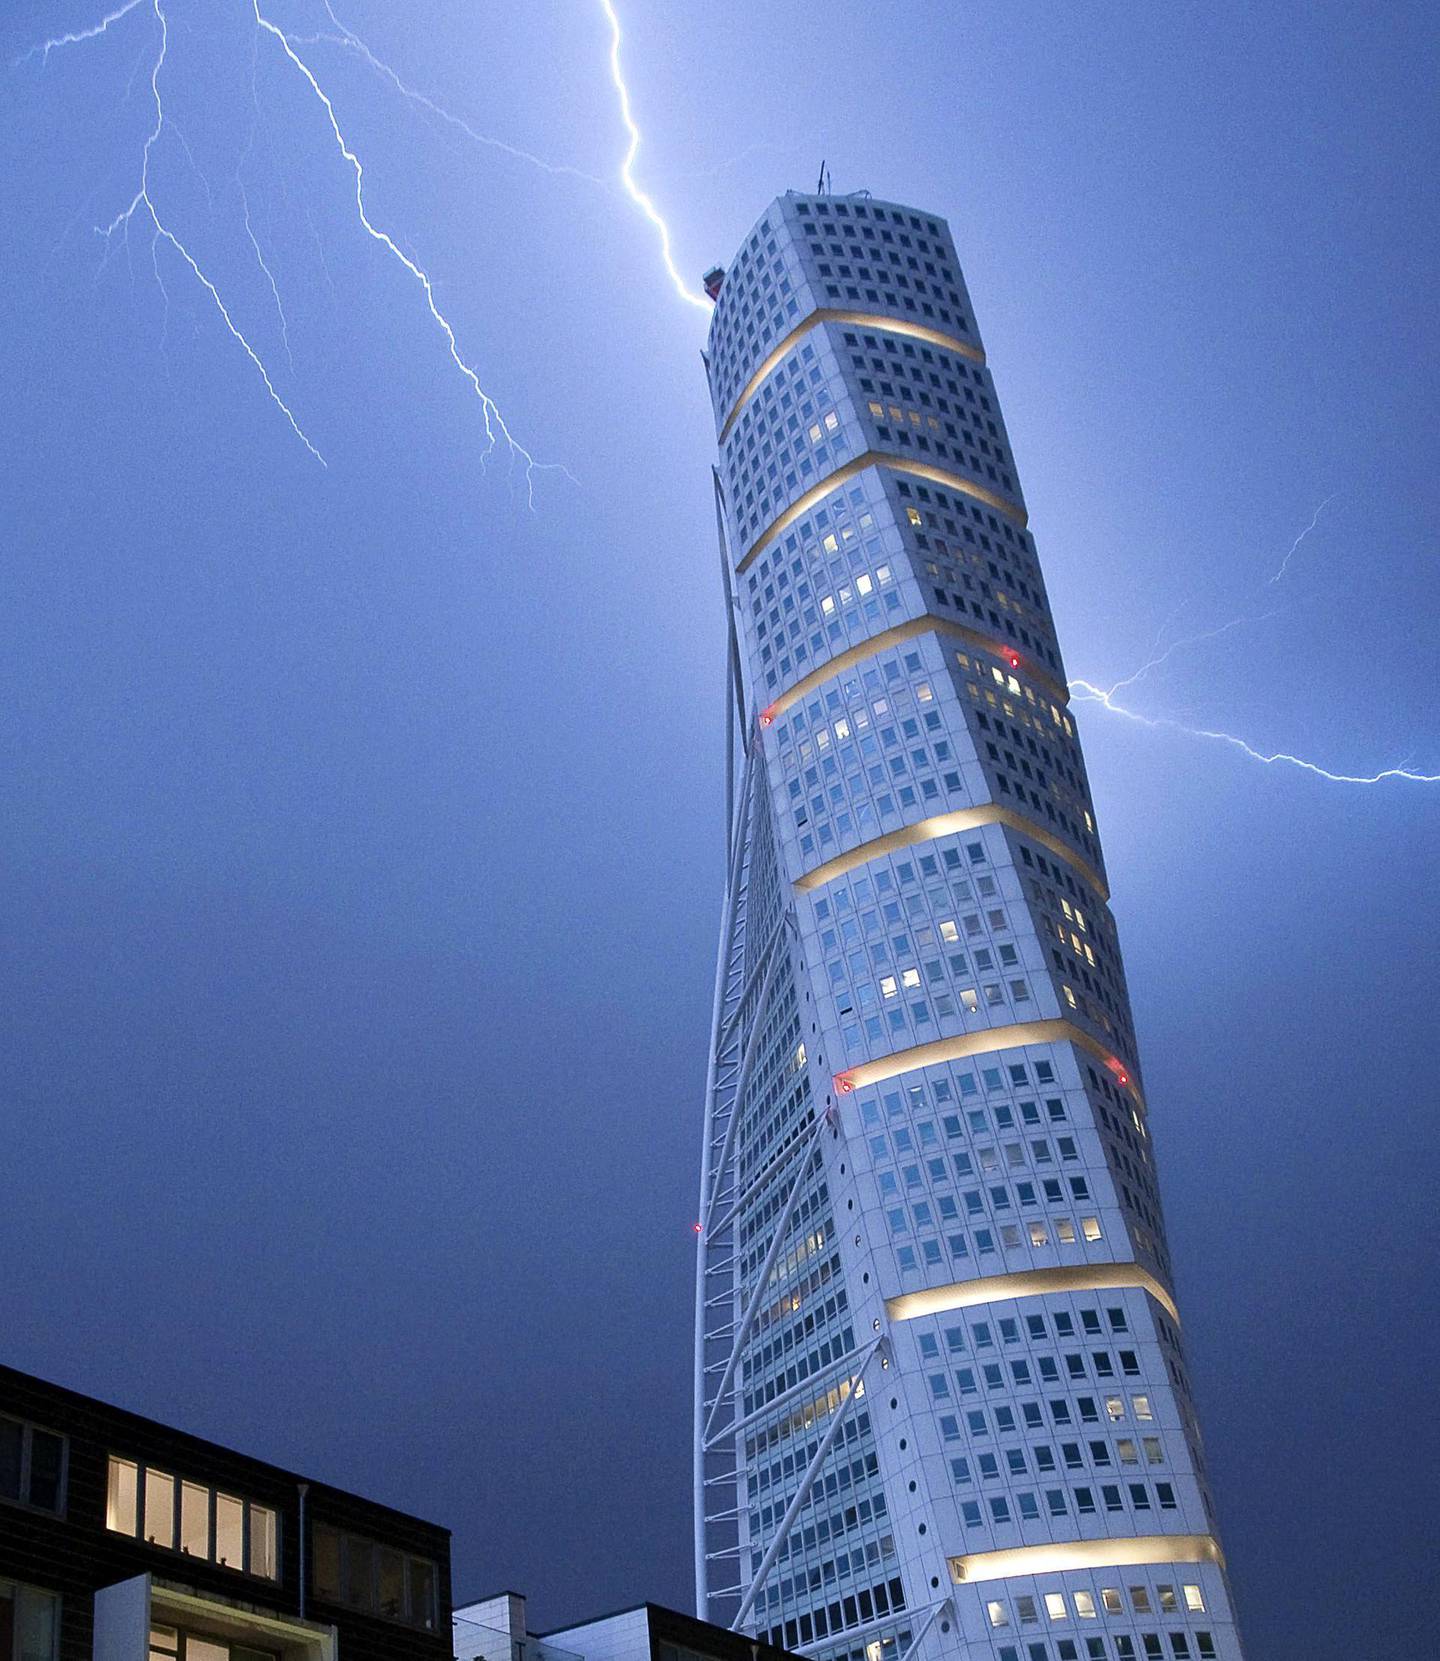 Lightning strikes the 190 m (623 ft)-high Turning Torso building in Malmo early morning on June 7, 2011. As the unseasonally hot weather was replaced by cooler winds, heavy rain and thunderstorms struck Sweden's South-west coast. AFP PHOTO / SCANPIX - JOHAN NILSSON (Photo by JOHAN NILSSON / SCANPIX SWEDEN / AFP)